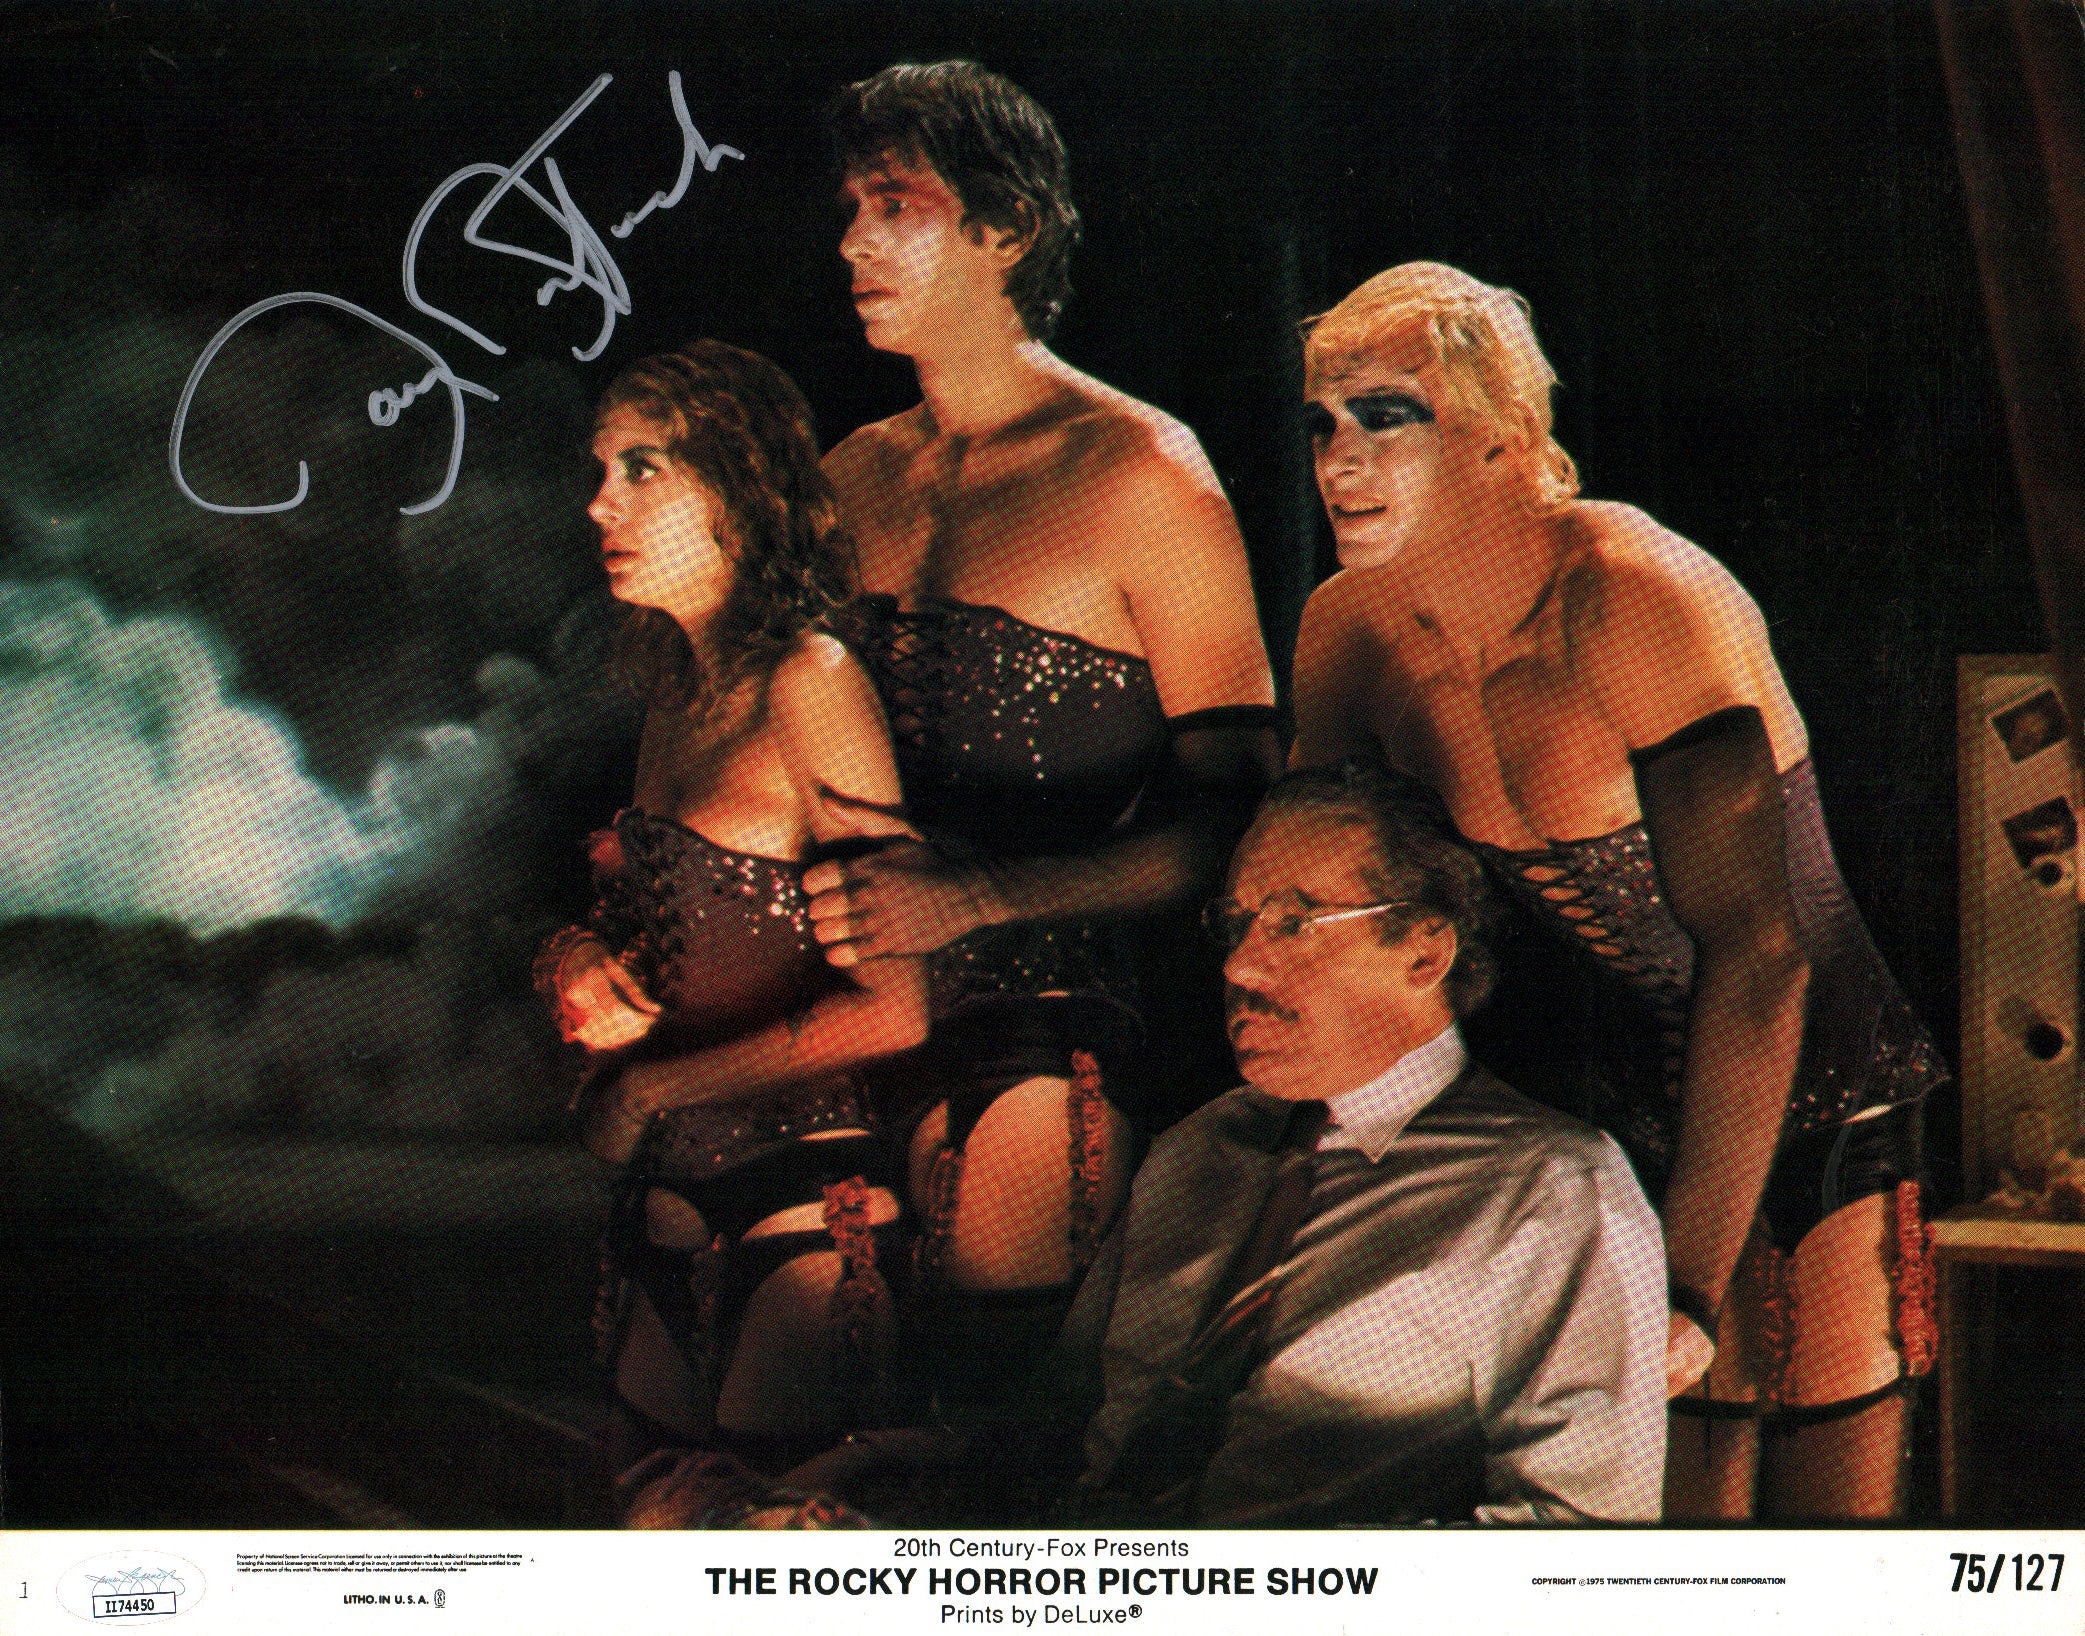 Barry Bostwick Rocky Horror Picture Show 11x14 Signed Lobby Card JSA COA Certified Autograph